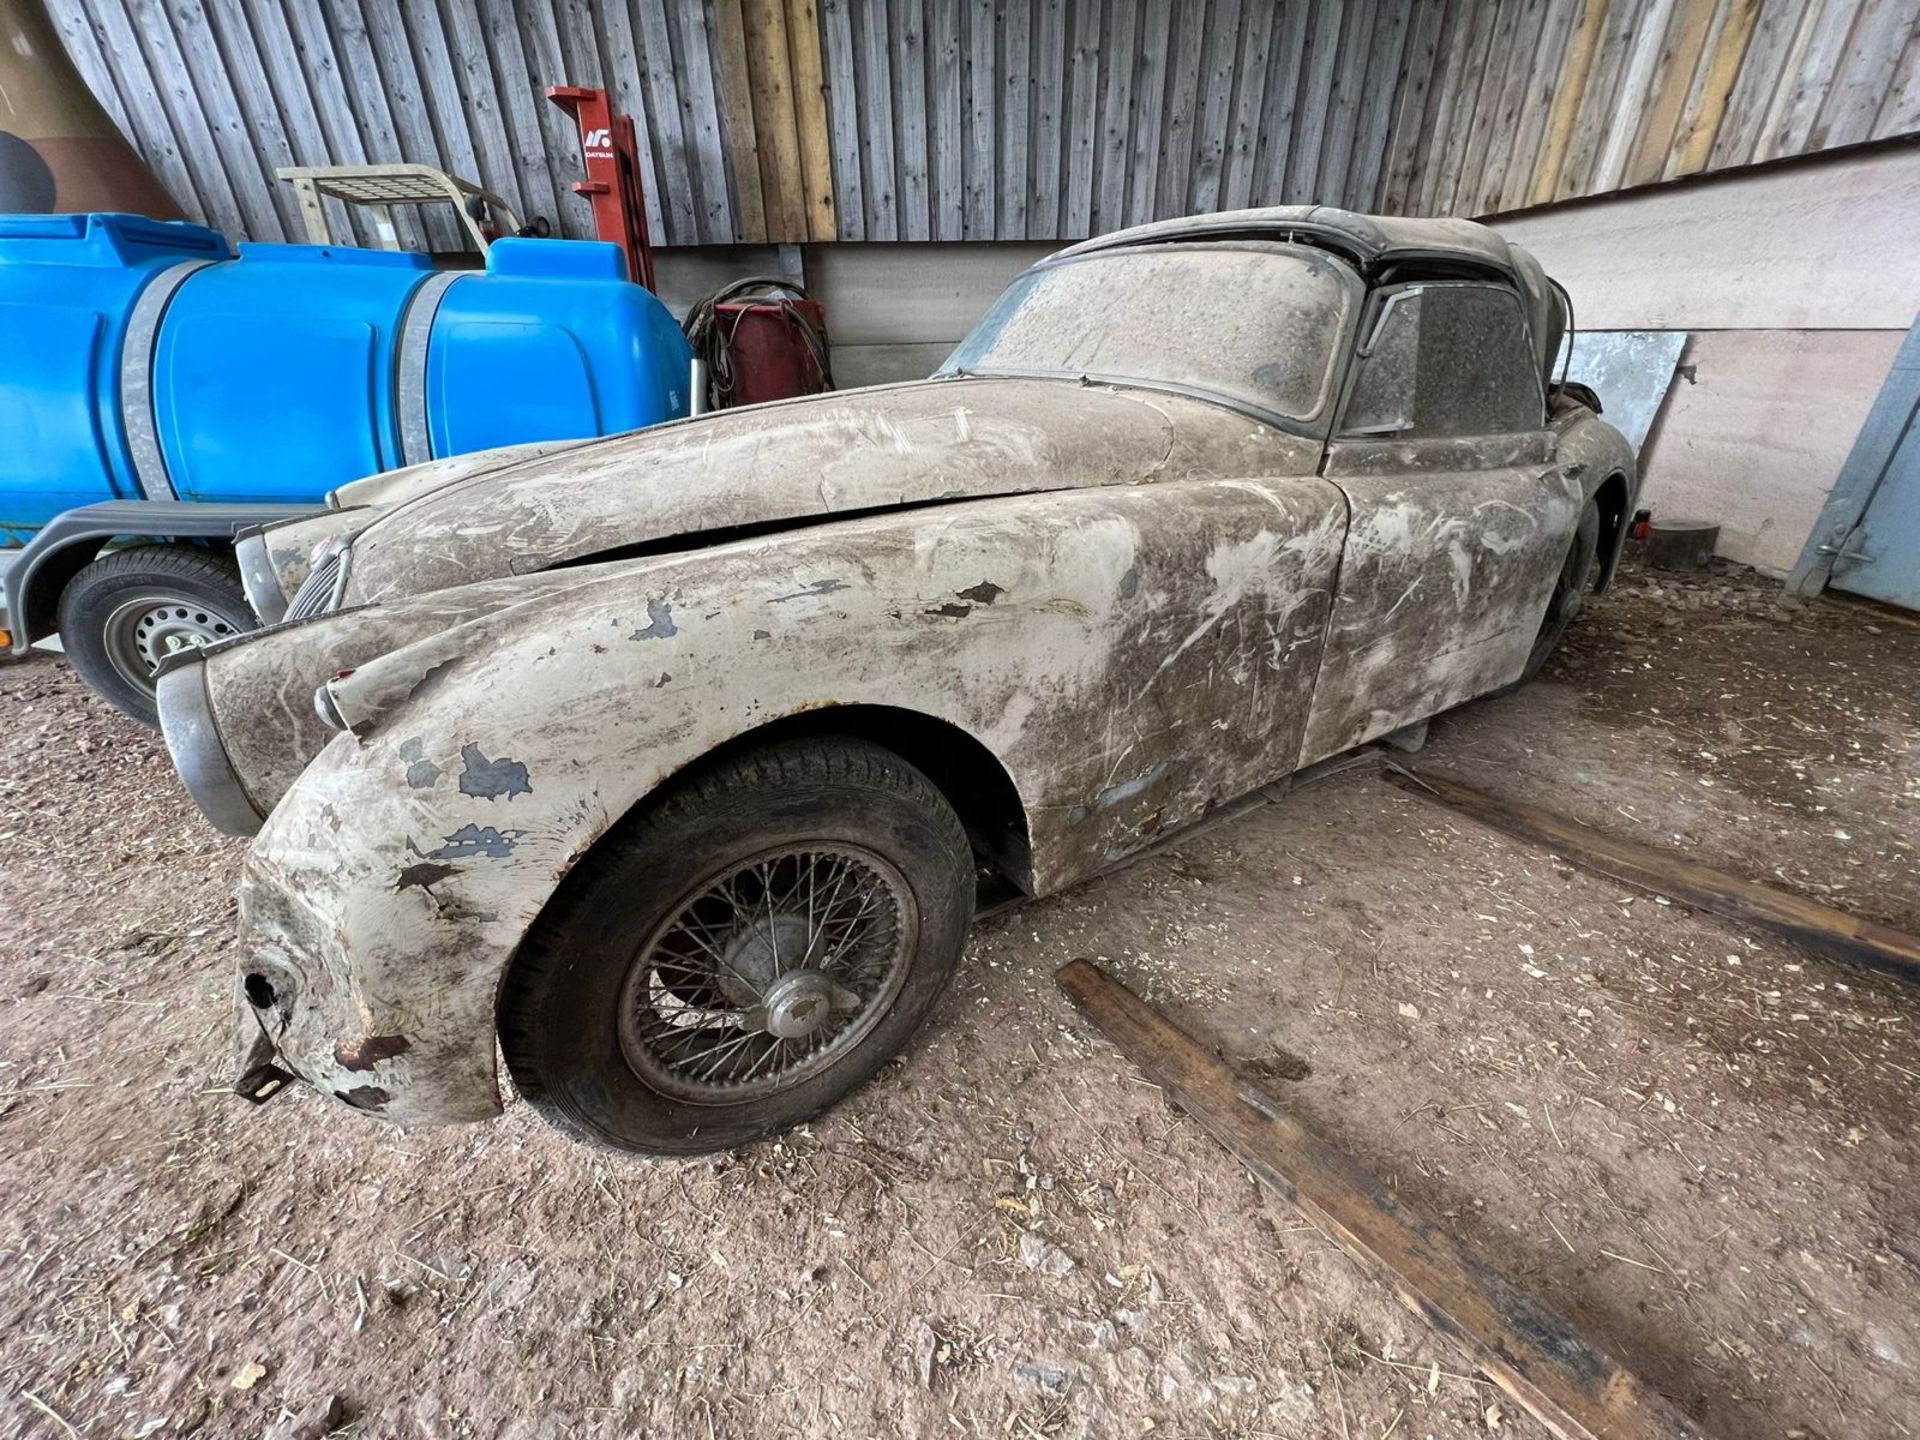 Jaguar XK150 3.4 Drop Head Coupe 1958 Barn Find. Matching numbers.